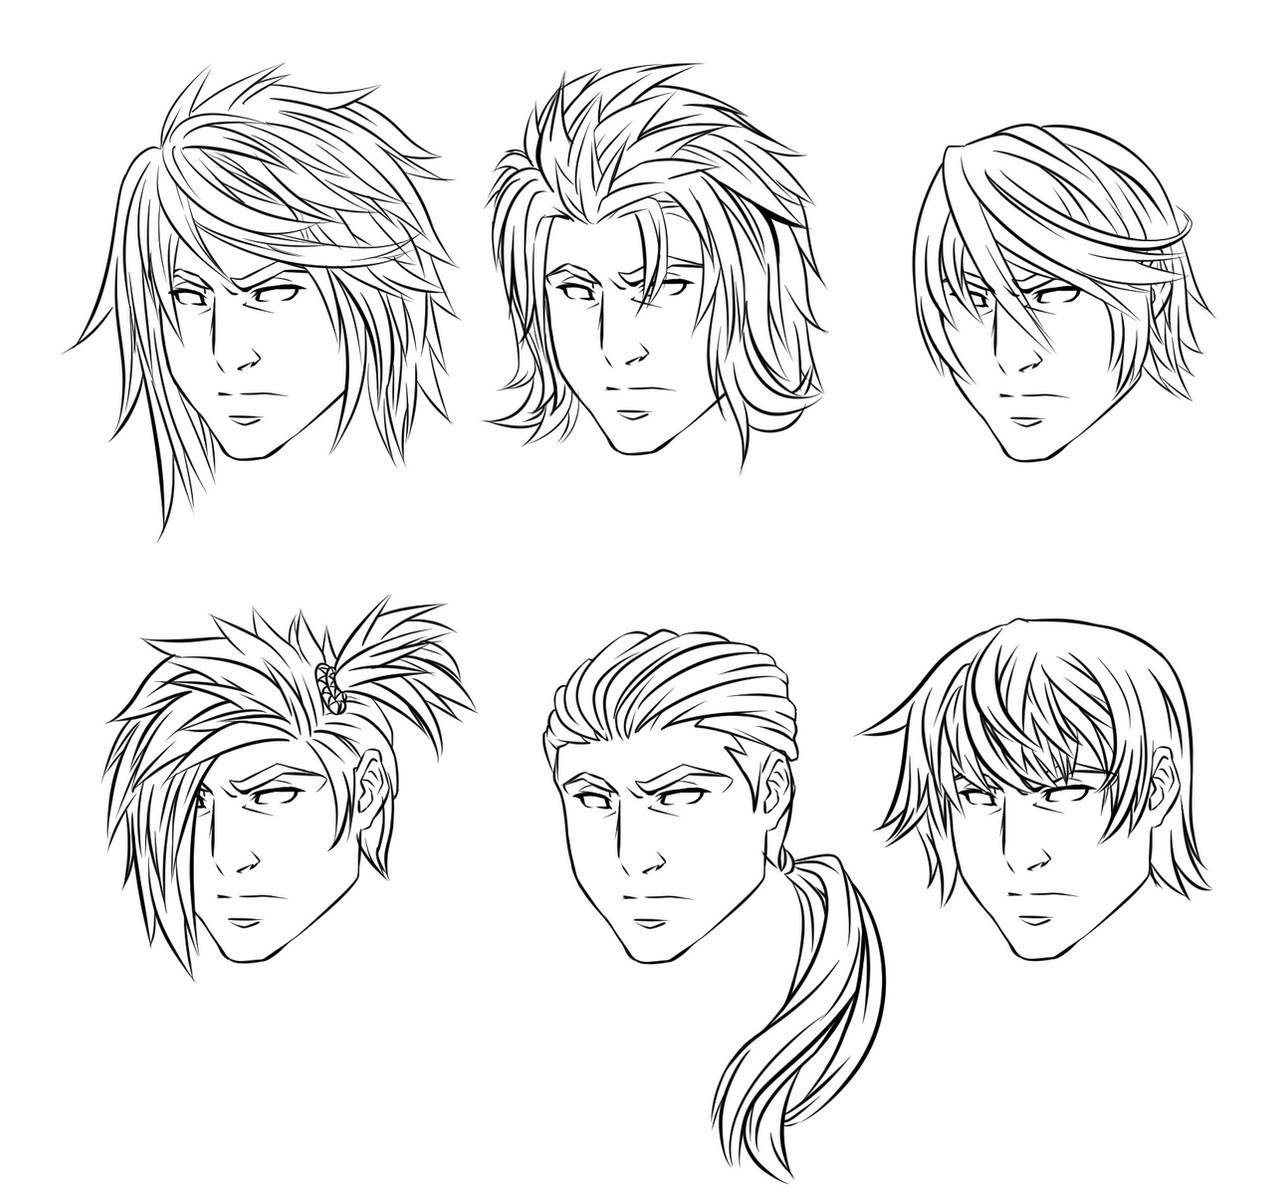 Male Hairstyles Anime
 Anime Male Hairstyles by CrimsonCypher on DeviantArt